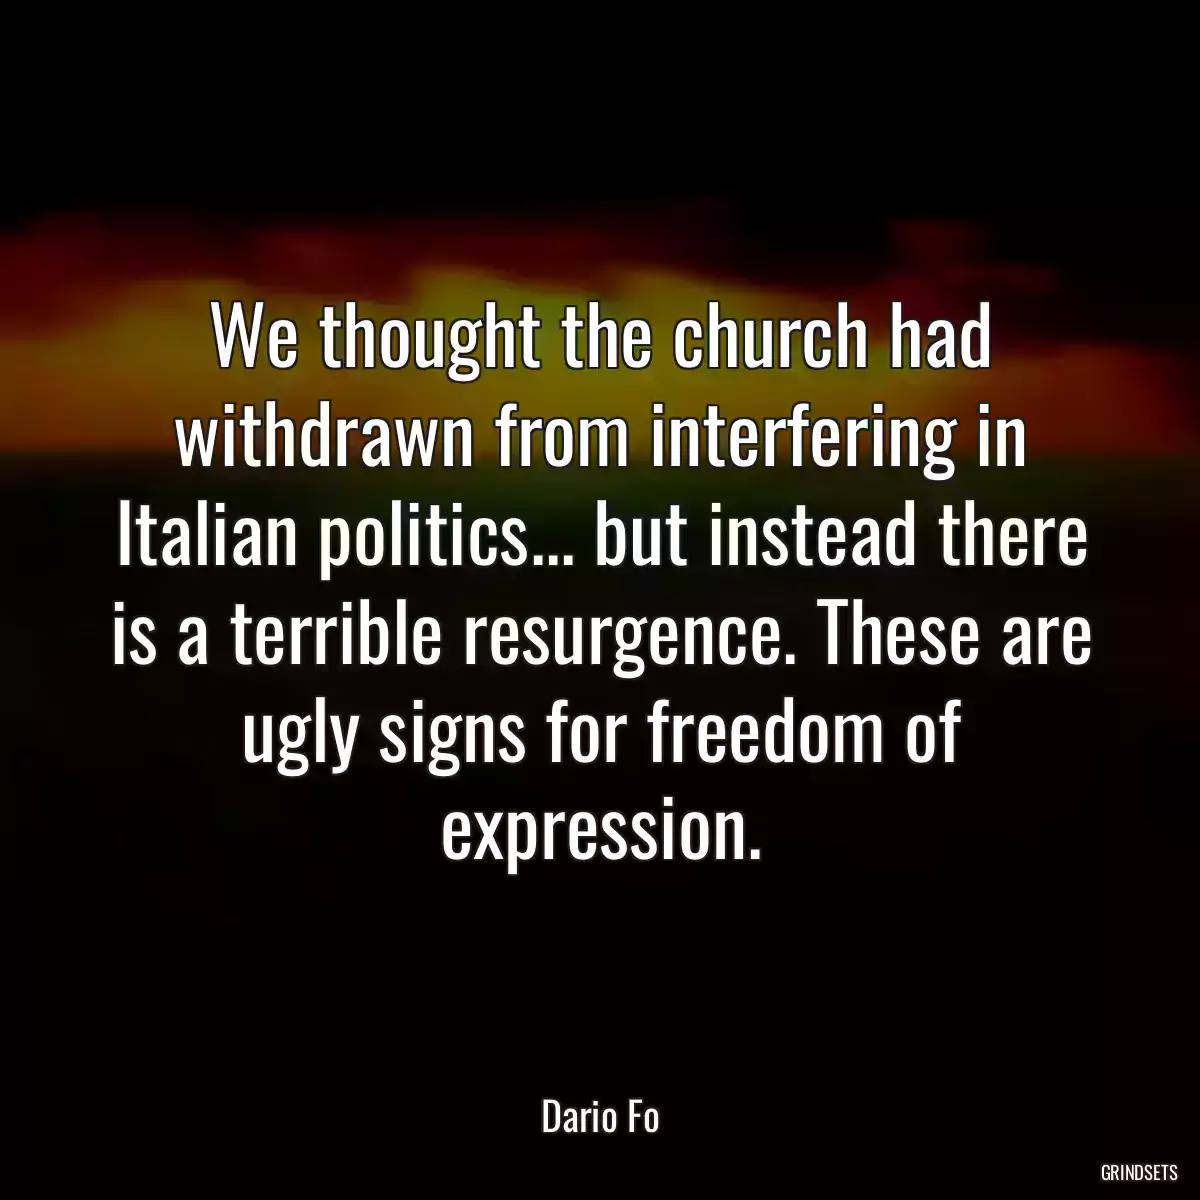 We thought the church had withdrawn from interfering in Italian politics... but instead there is a terrible resurgence. These are ugly signs for freedom of expression.